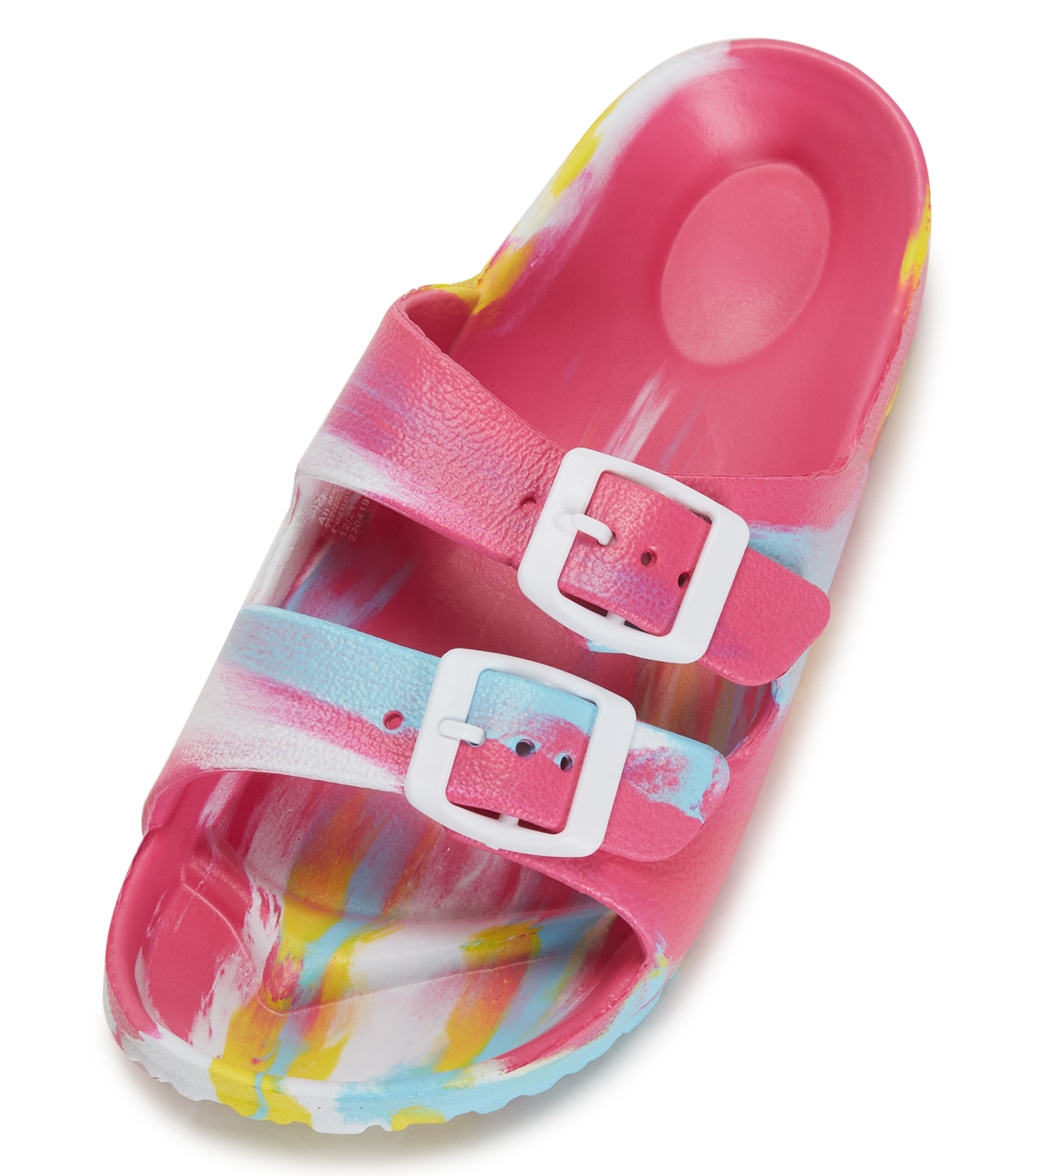 Northside Girl's Tate Slip On Shoes Shoes Sandals - Pink/Multi 2 - Swimoutlet.com